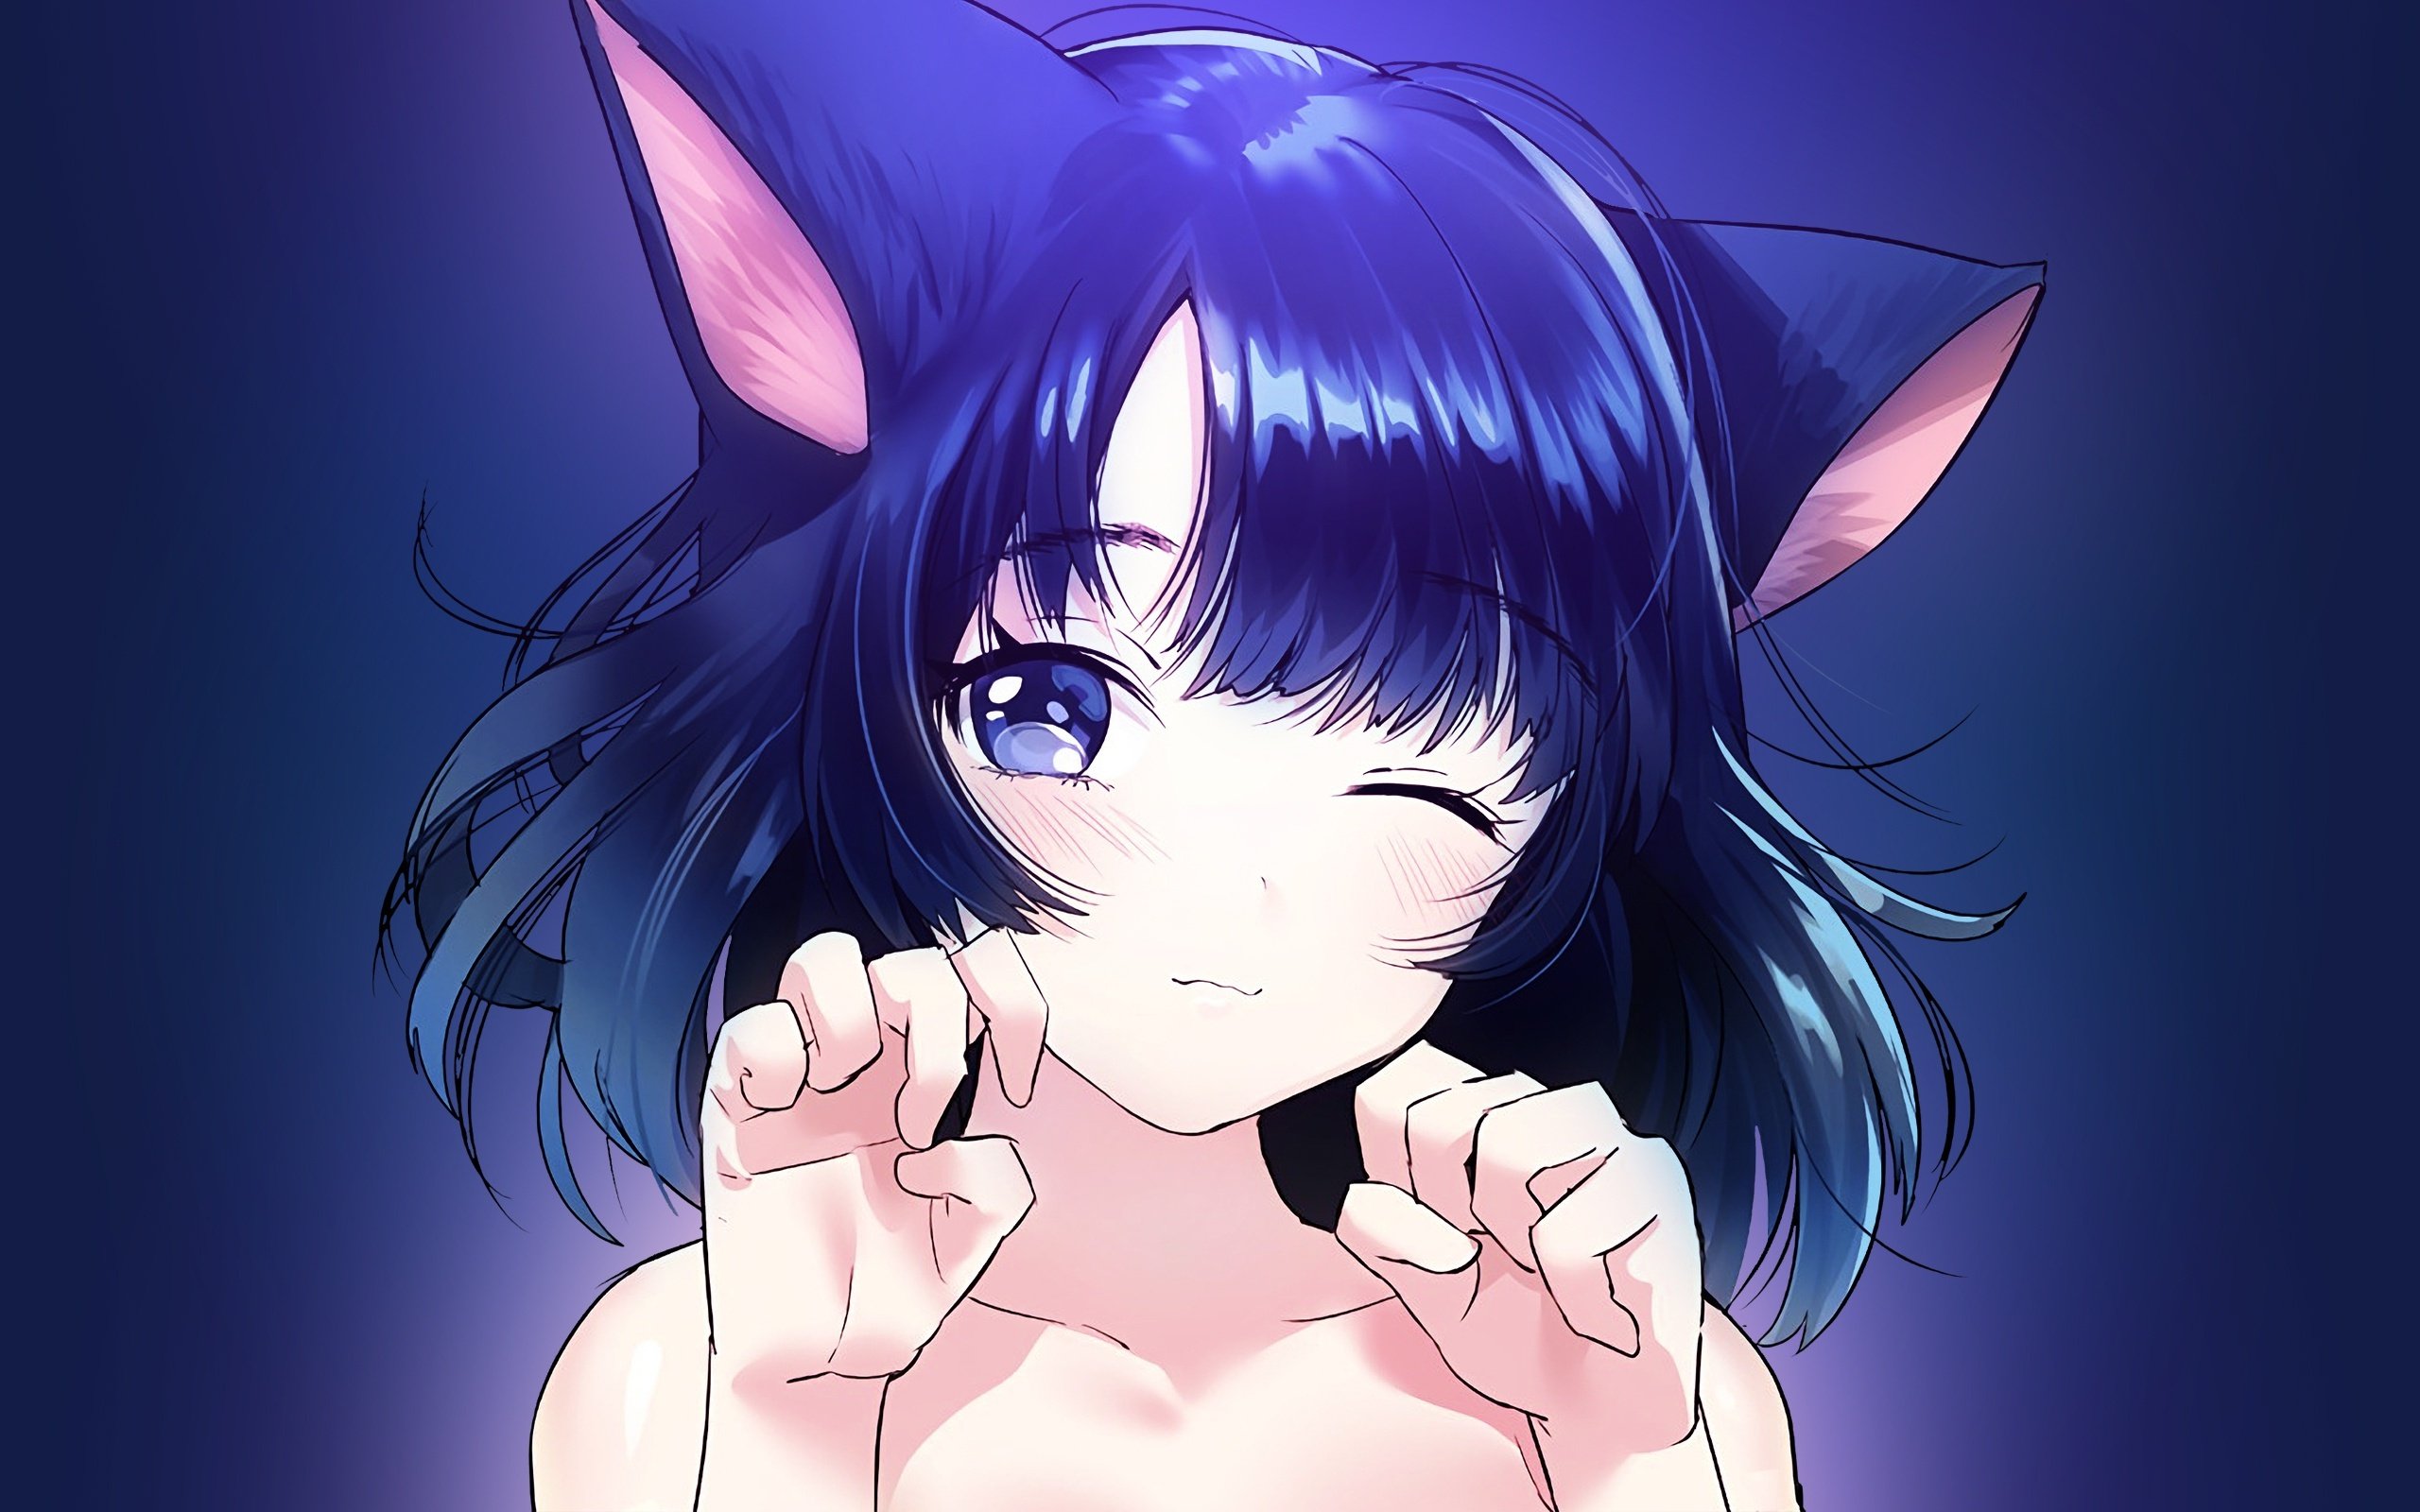 HD wallpaper anime girl cat ears neko wink blue hair young adult  hairstyle  Wallpaper Flare